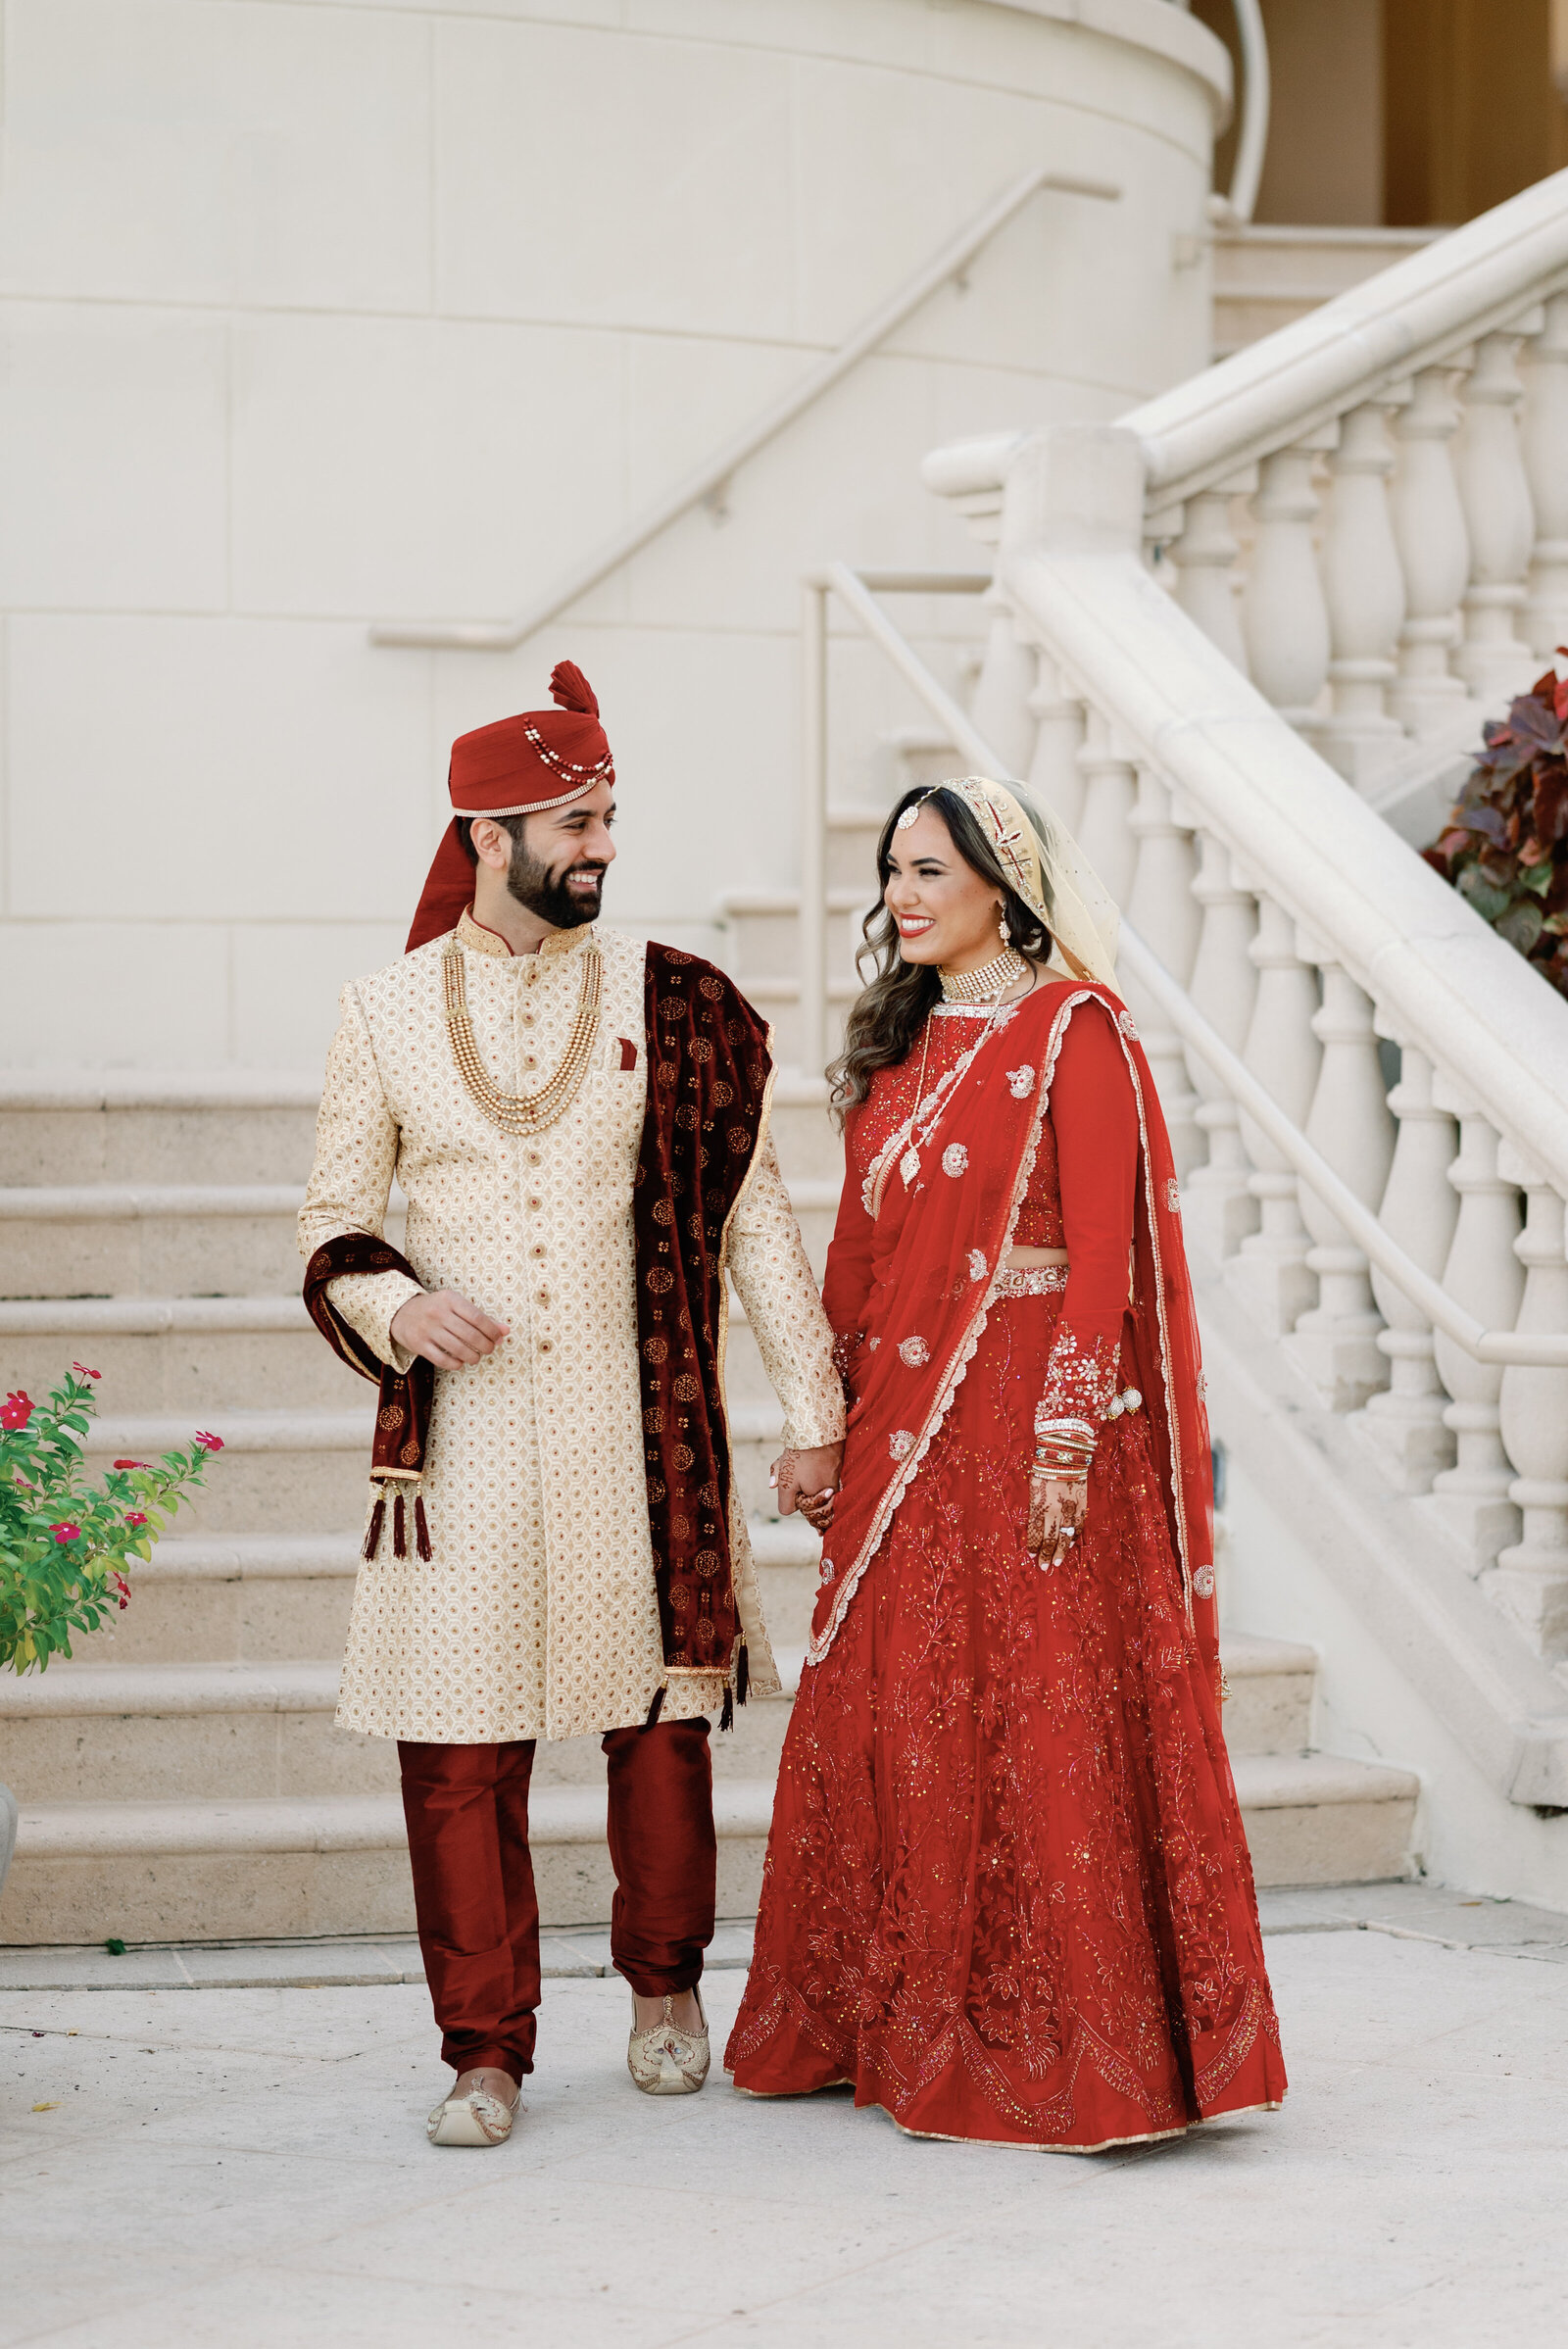 indian wedding couple walking and smiling together after their wedding day first look